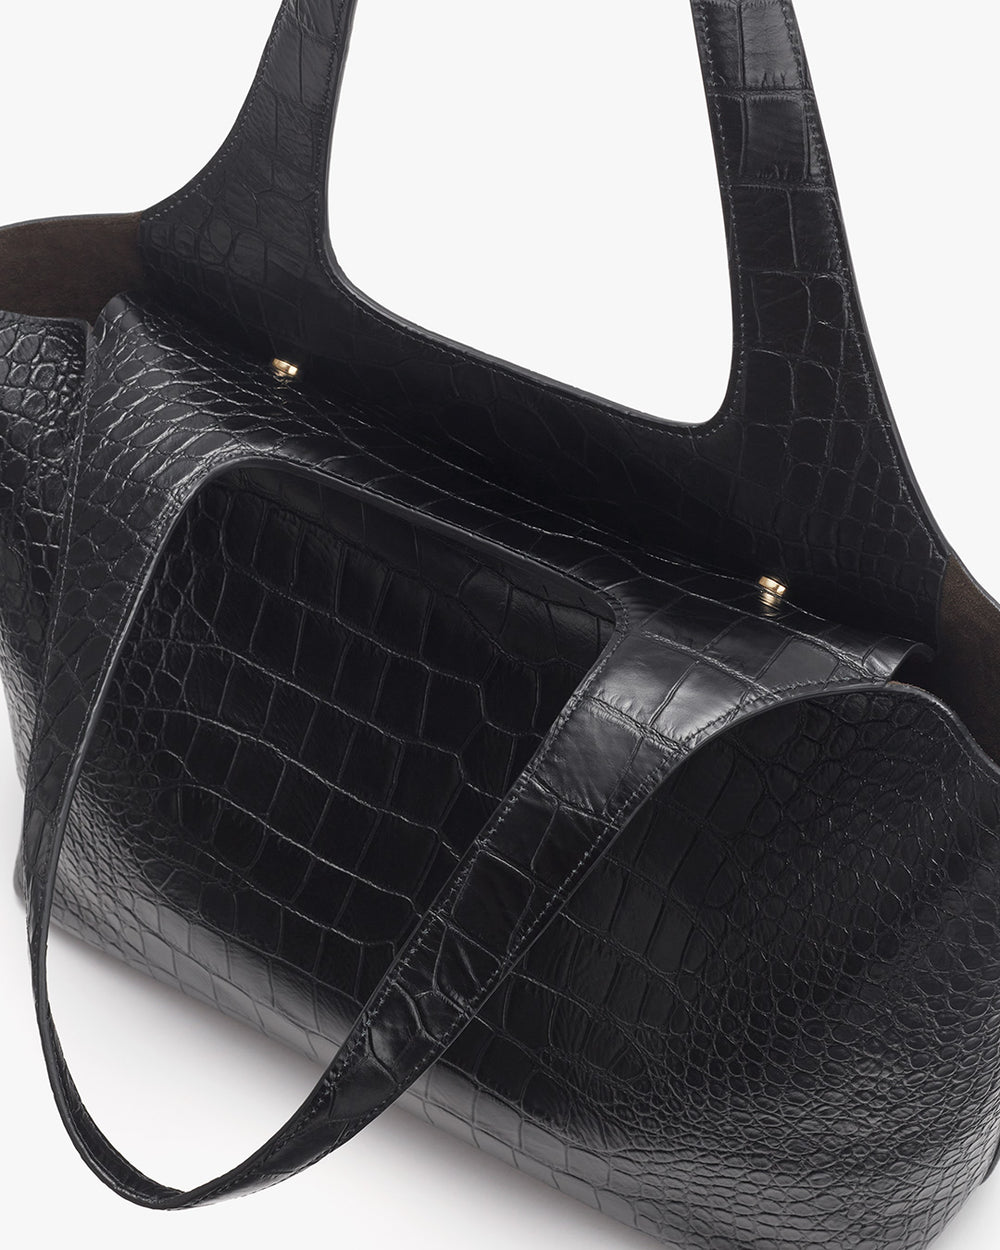 Handbag with a textured surface and two handles.